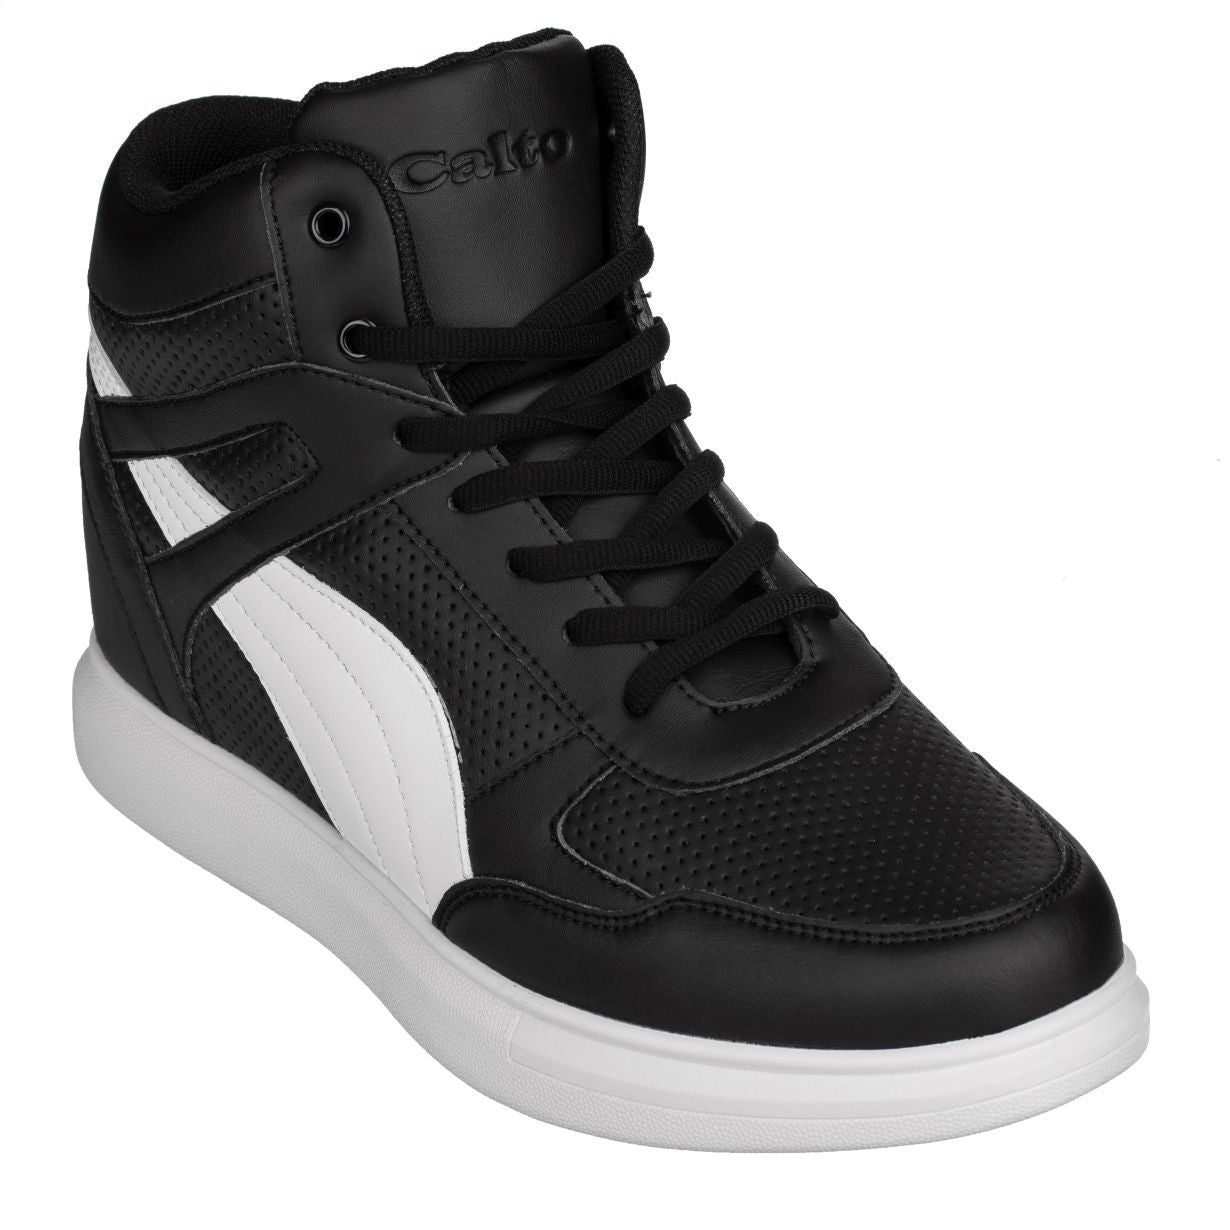 Elevator shoes height increase CALTO High-Top Sneaker Elevator Shoes - 3.8 Inches - H71901